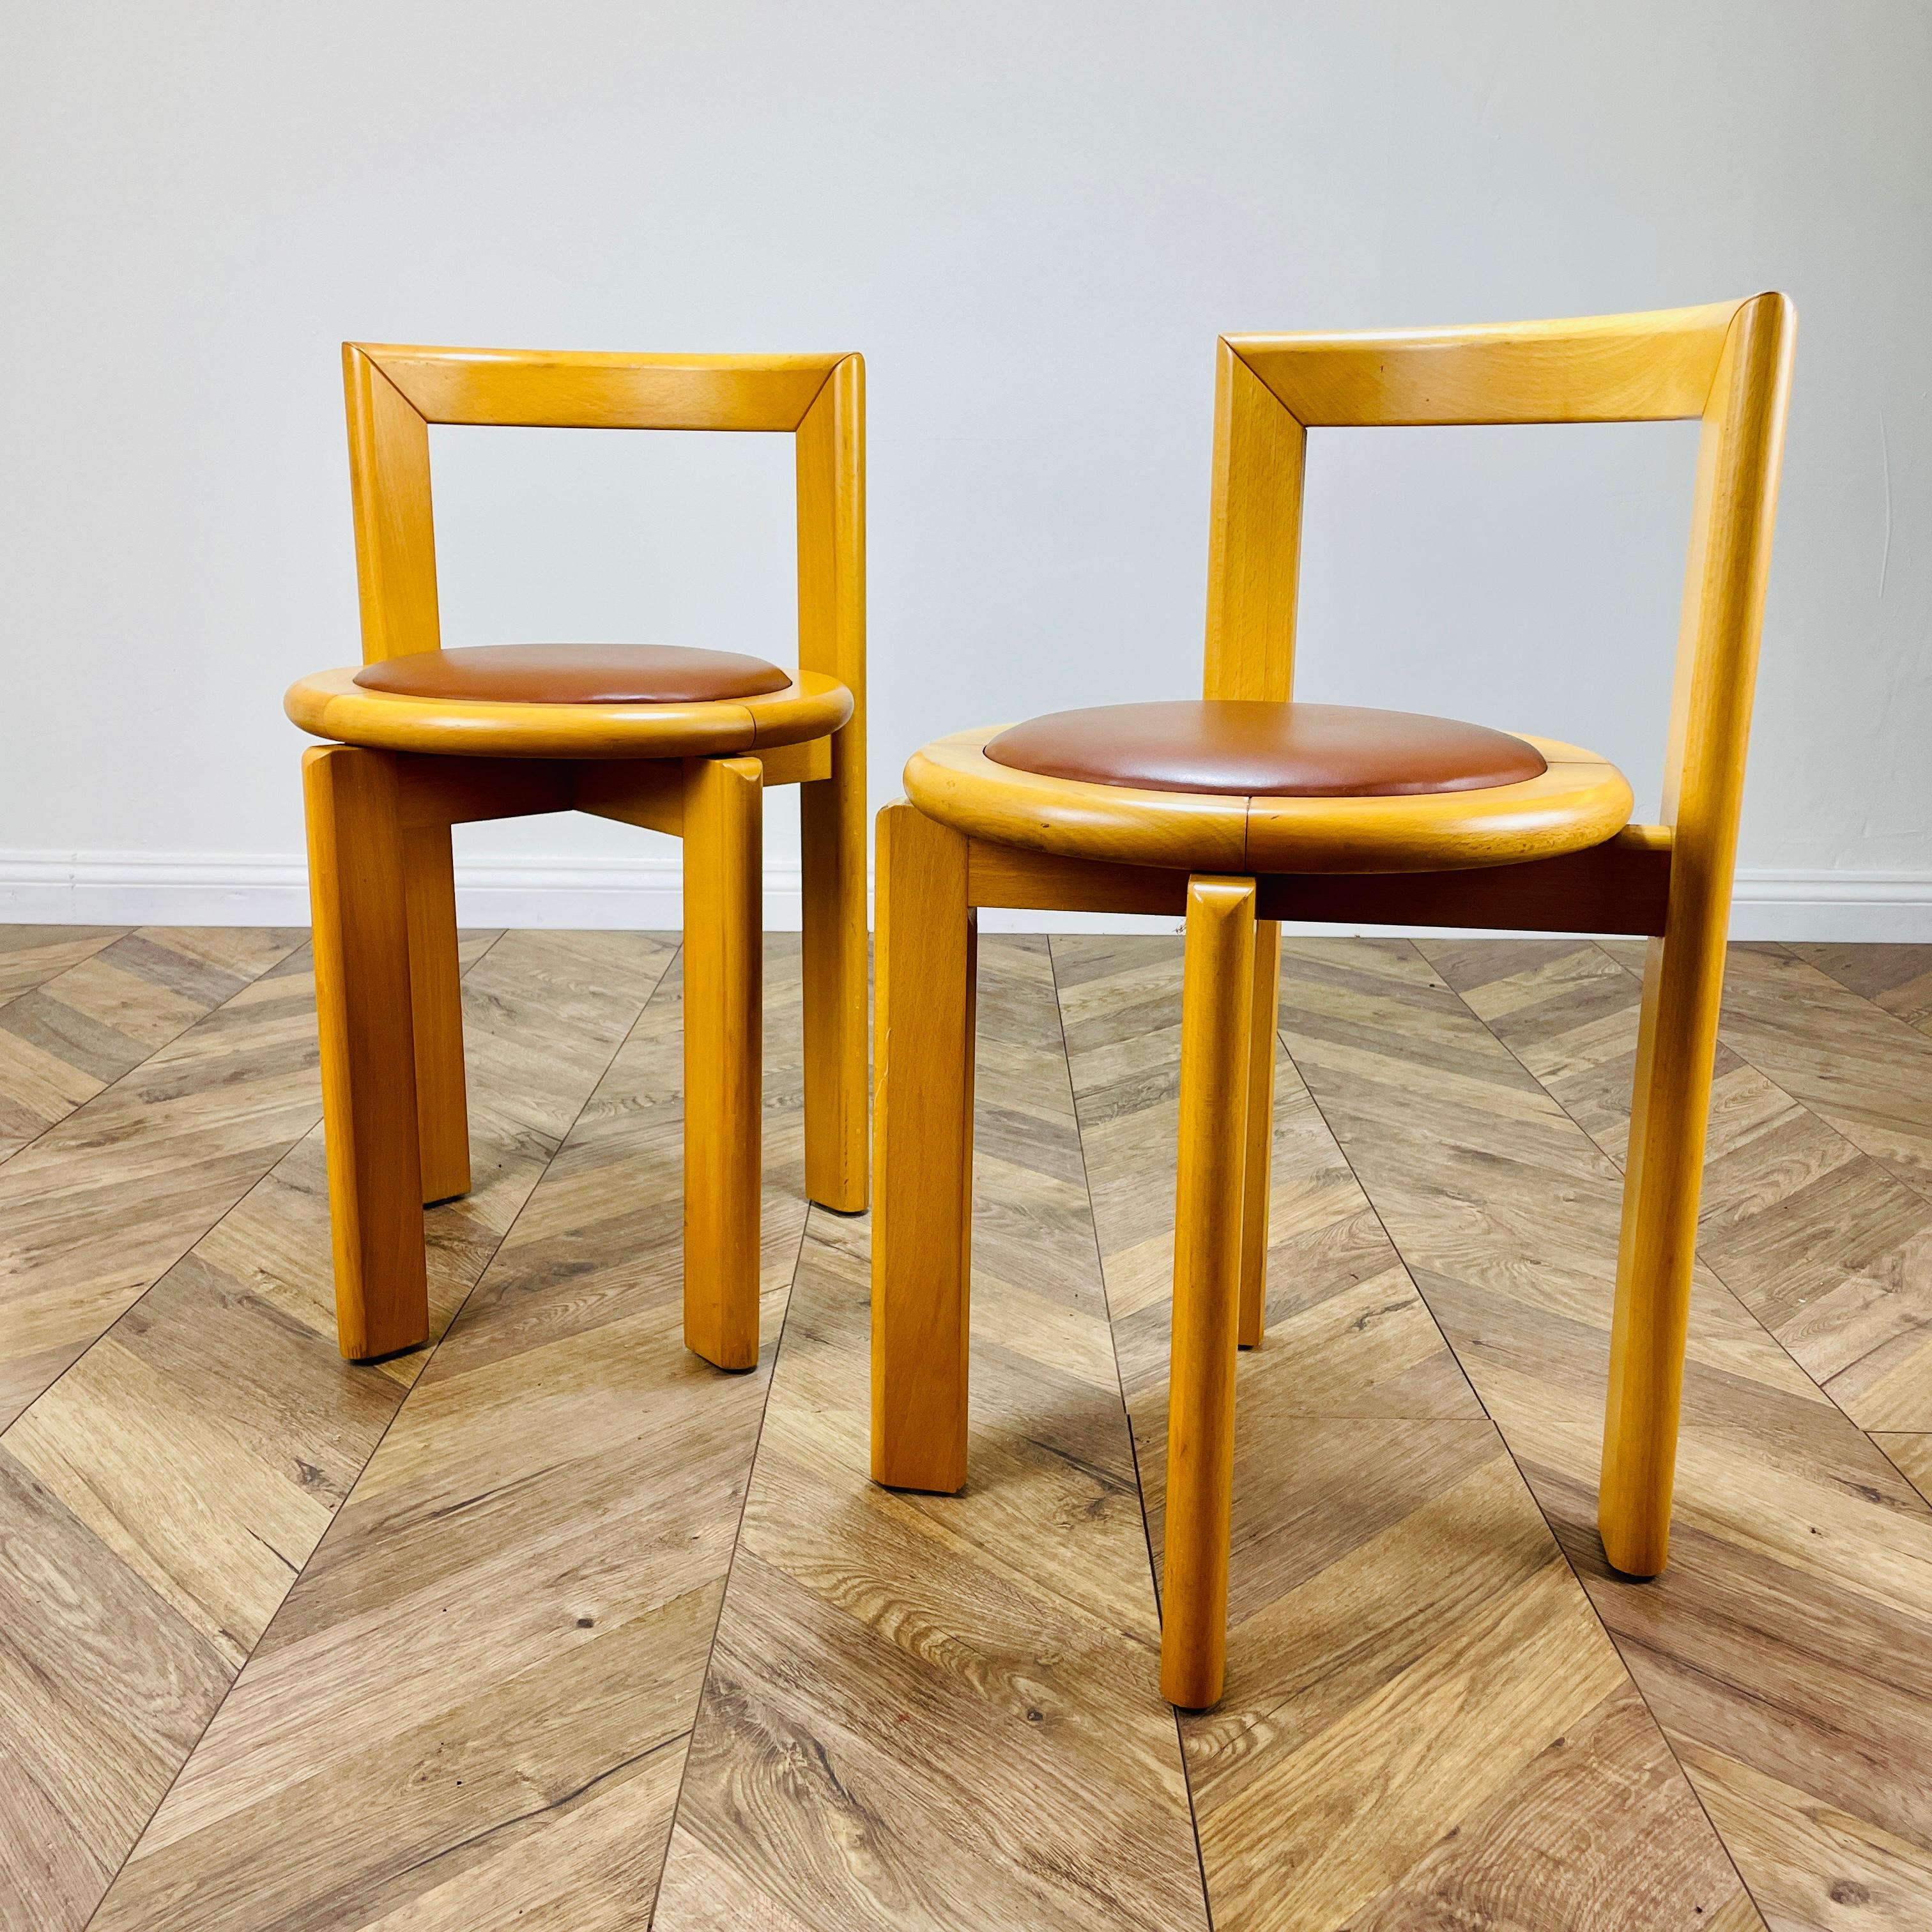 A Pair of Mid Century, Modernist Chairs Made in Sweden by Glimåkra, very much in the style of Bruno Rey.

Boasting clean lines and in good vintage condition, the blond wood and vinyl seats, which provide a lovely contrast to these comfortable